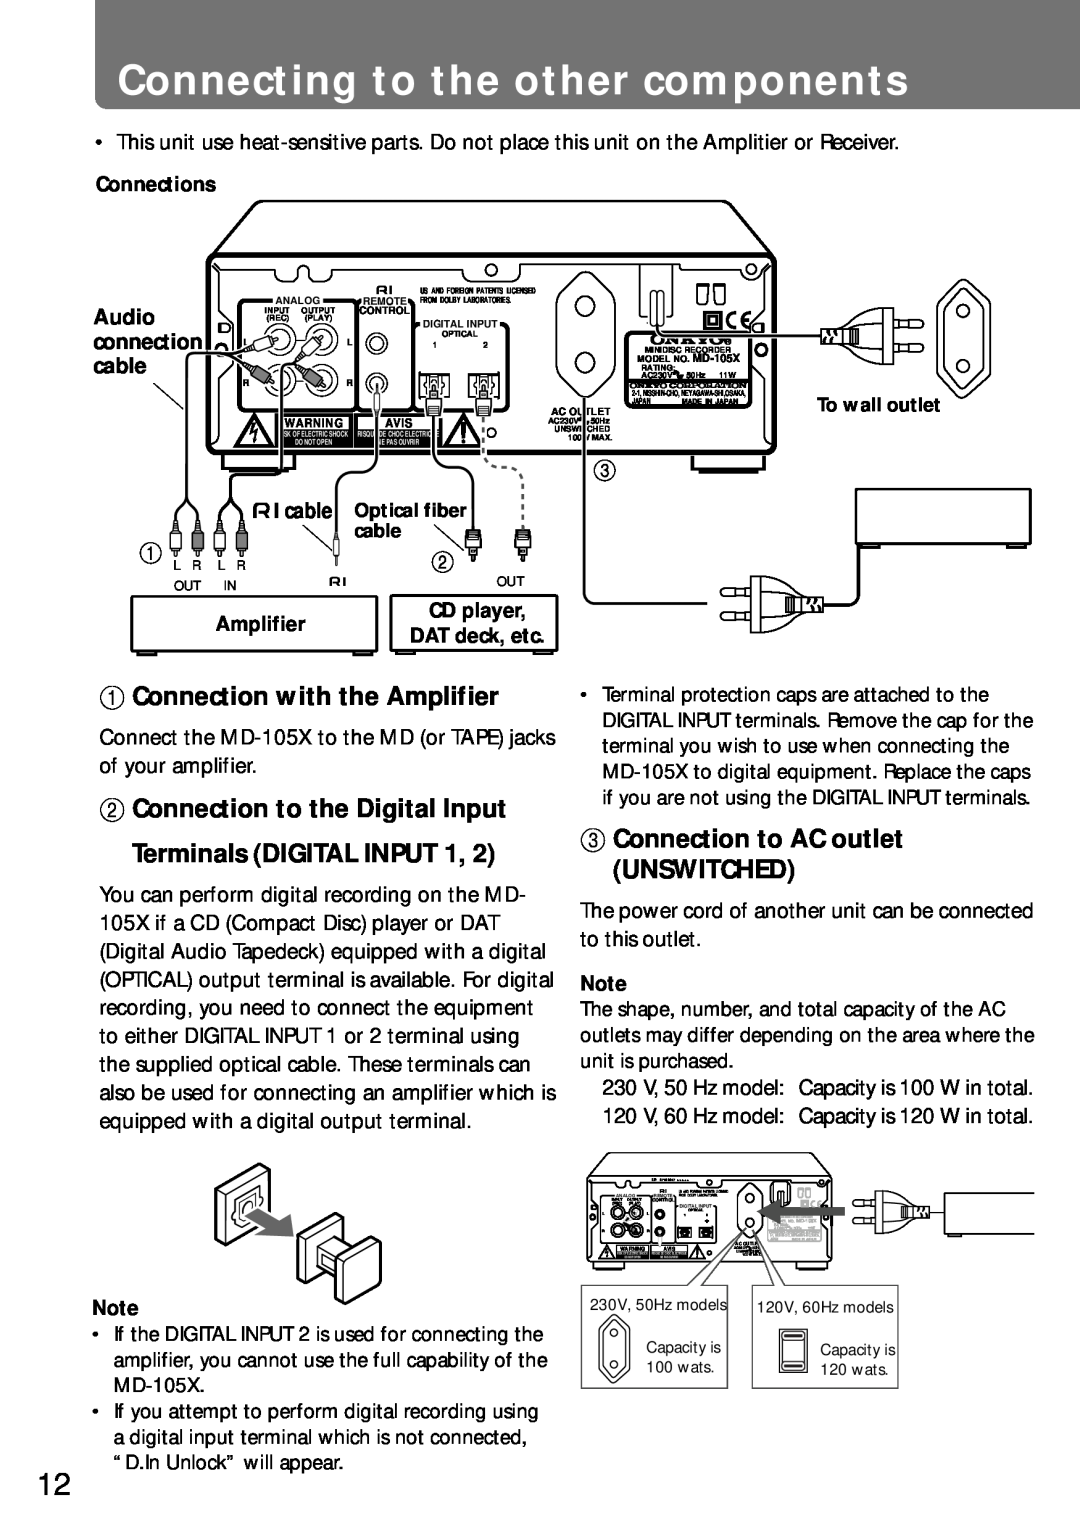 Onkyo MD-105X manual 1Connection with the Amplifier, 2Connection to the Digital Input, Terminals DIGITAL INPUT, Connections 